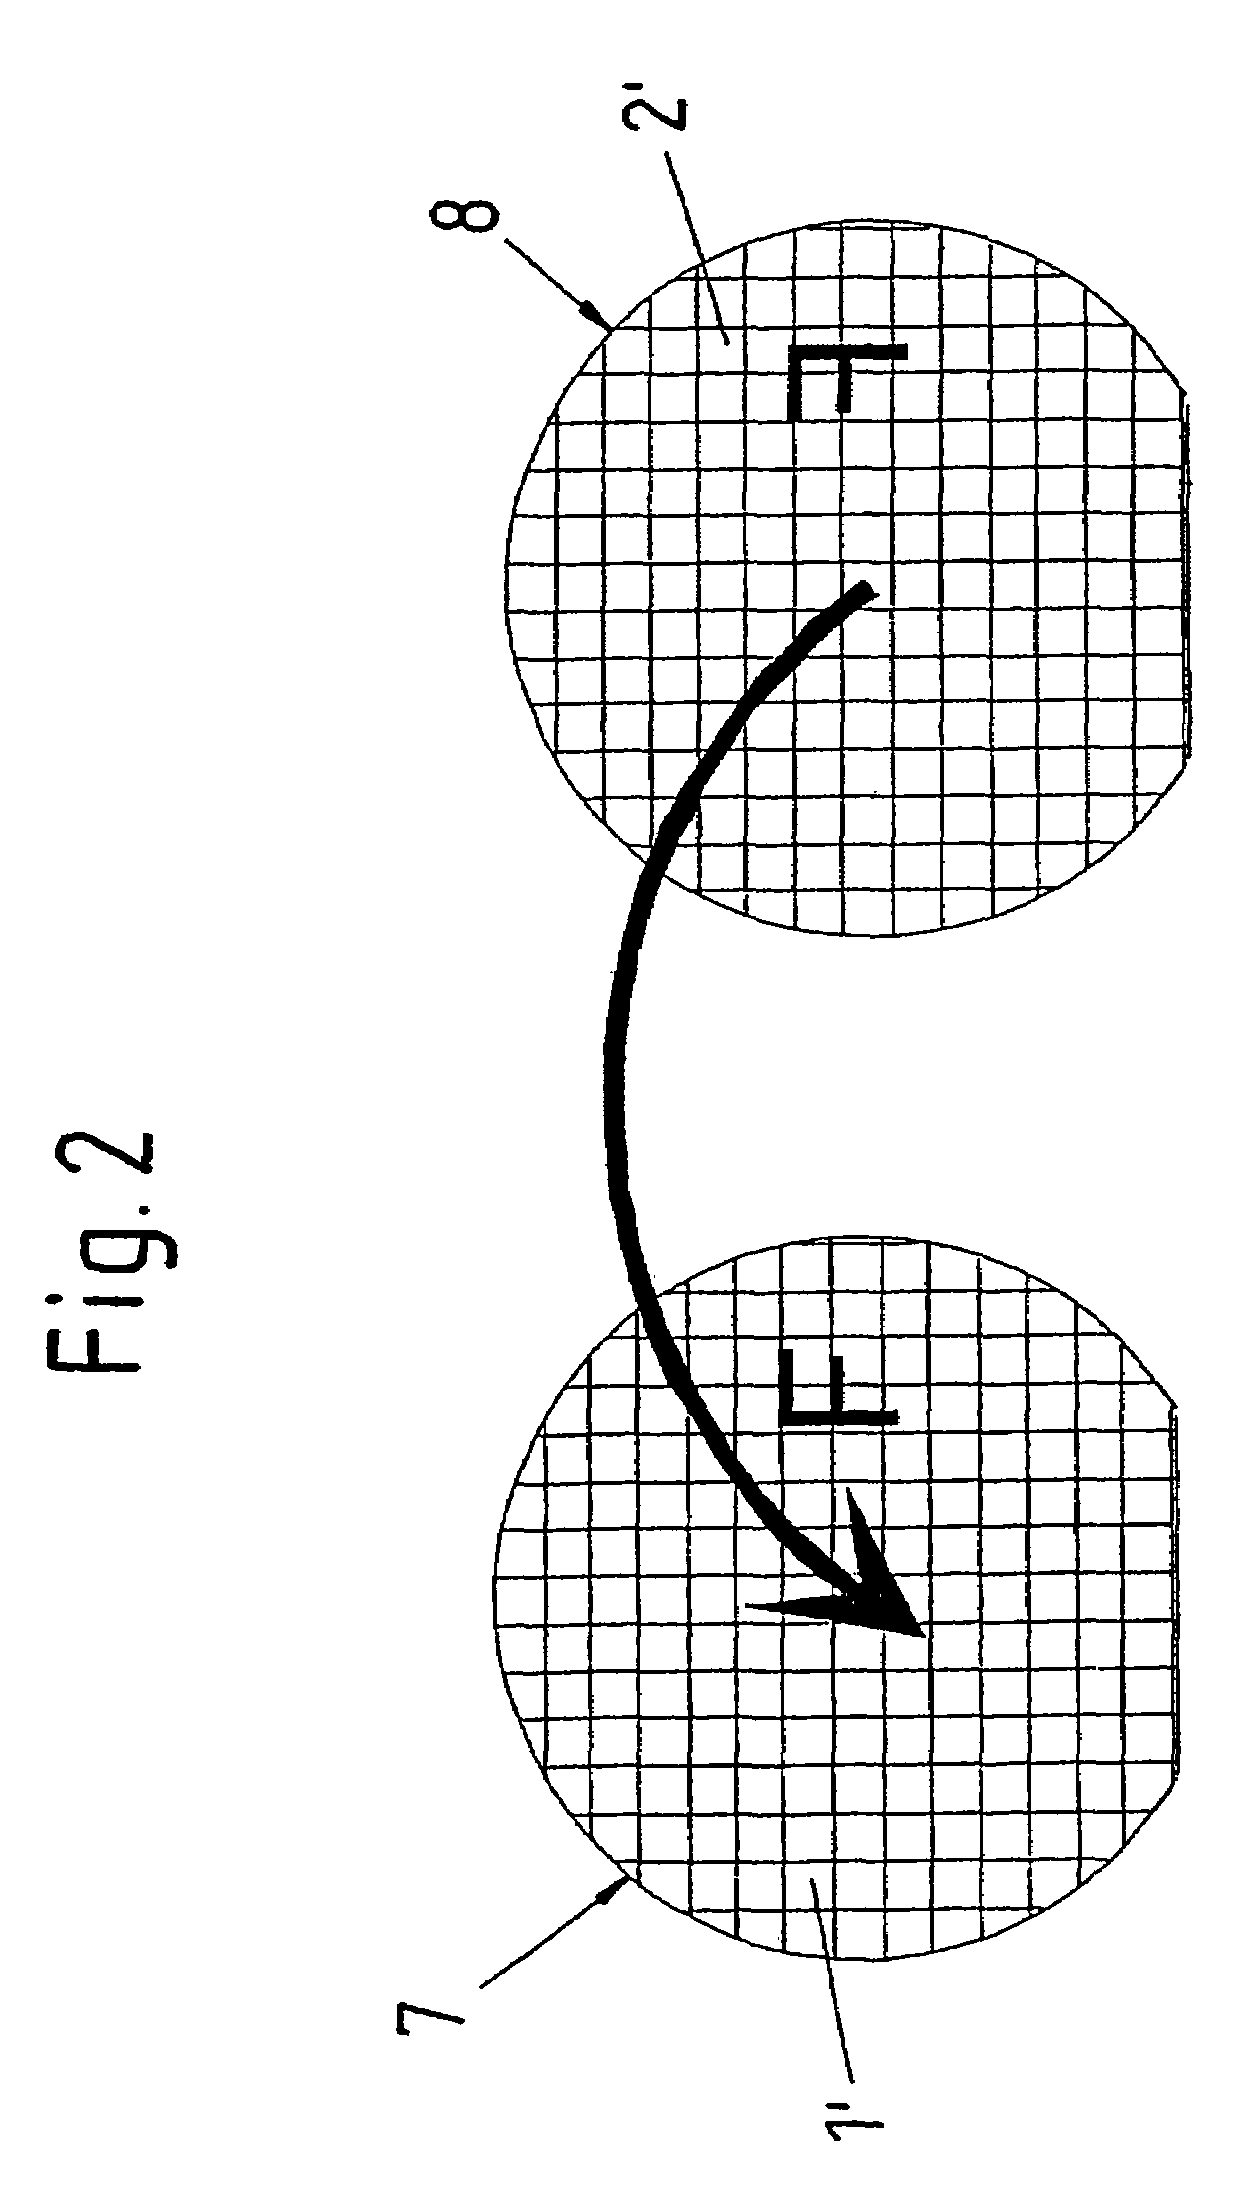 Photodiode array and method for establishing a link between a first semiconductor element and a second semiconductor element